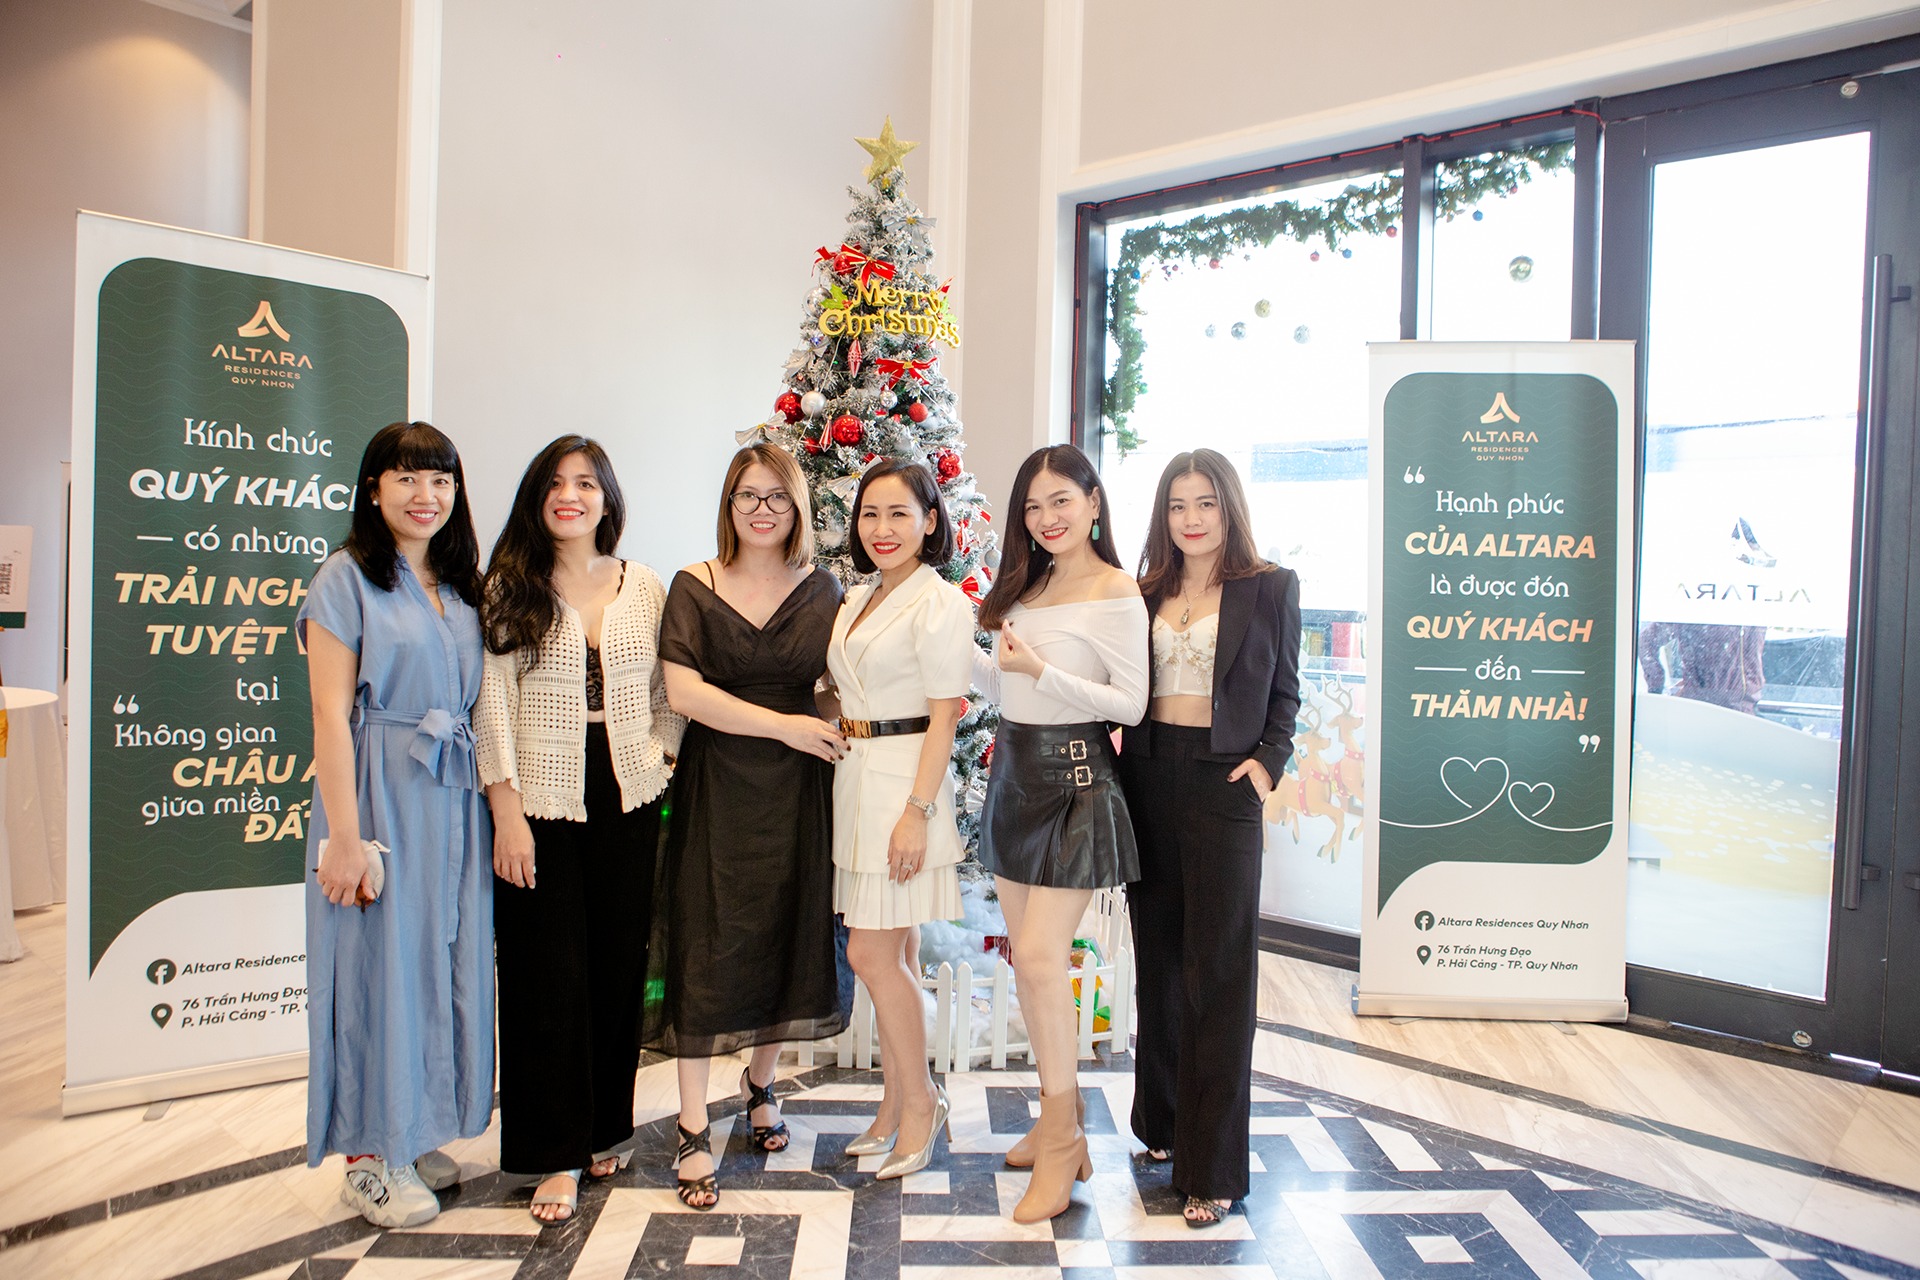 Altara Serviced Residences jubilantly welcomes its first guests